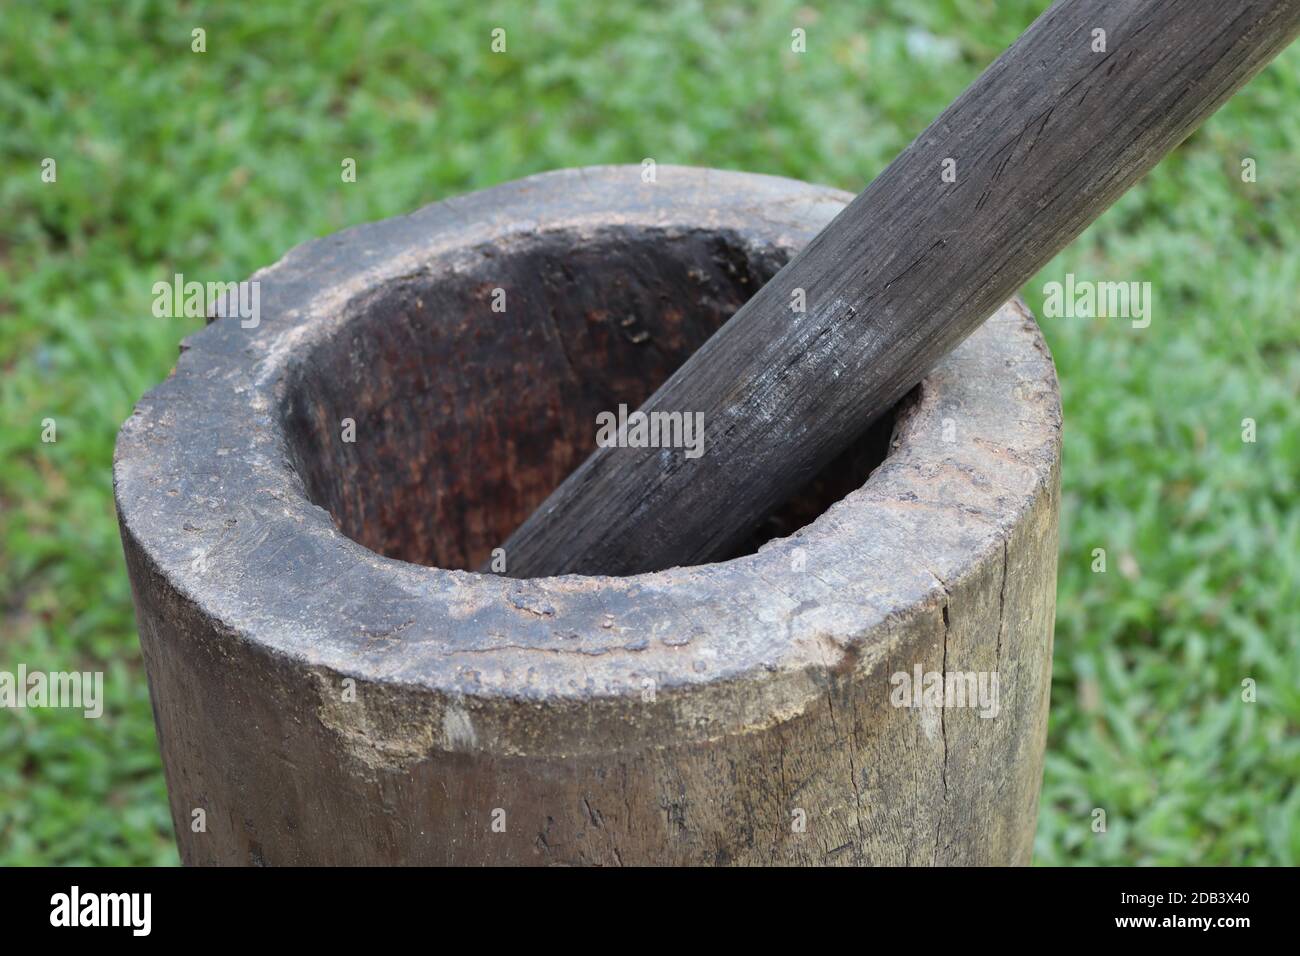 From the history, villagers use this simple item as their grinder to make rise flour, green grain or dhal flour for food and to make local medicines. Stock Photo